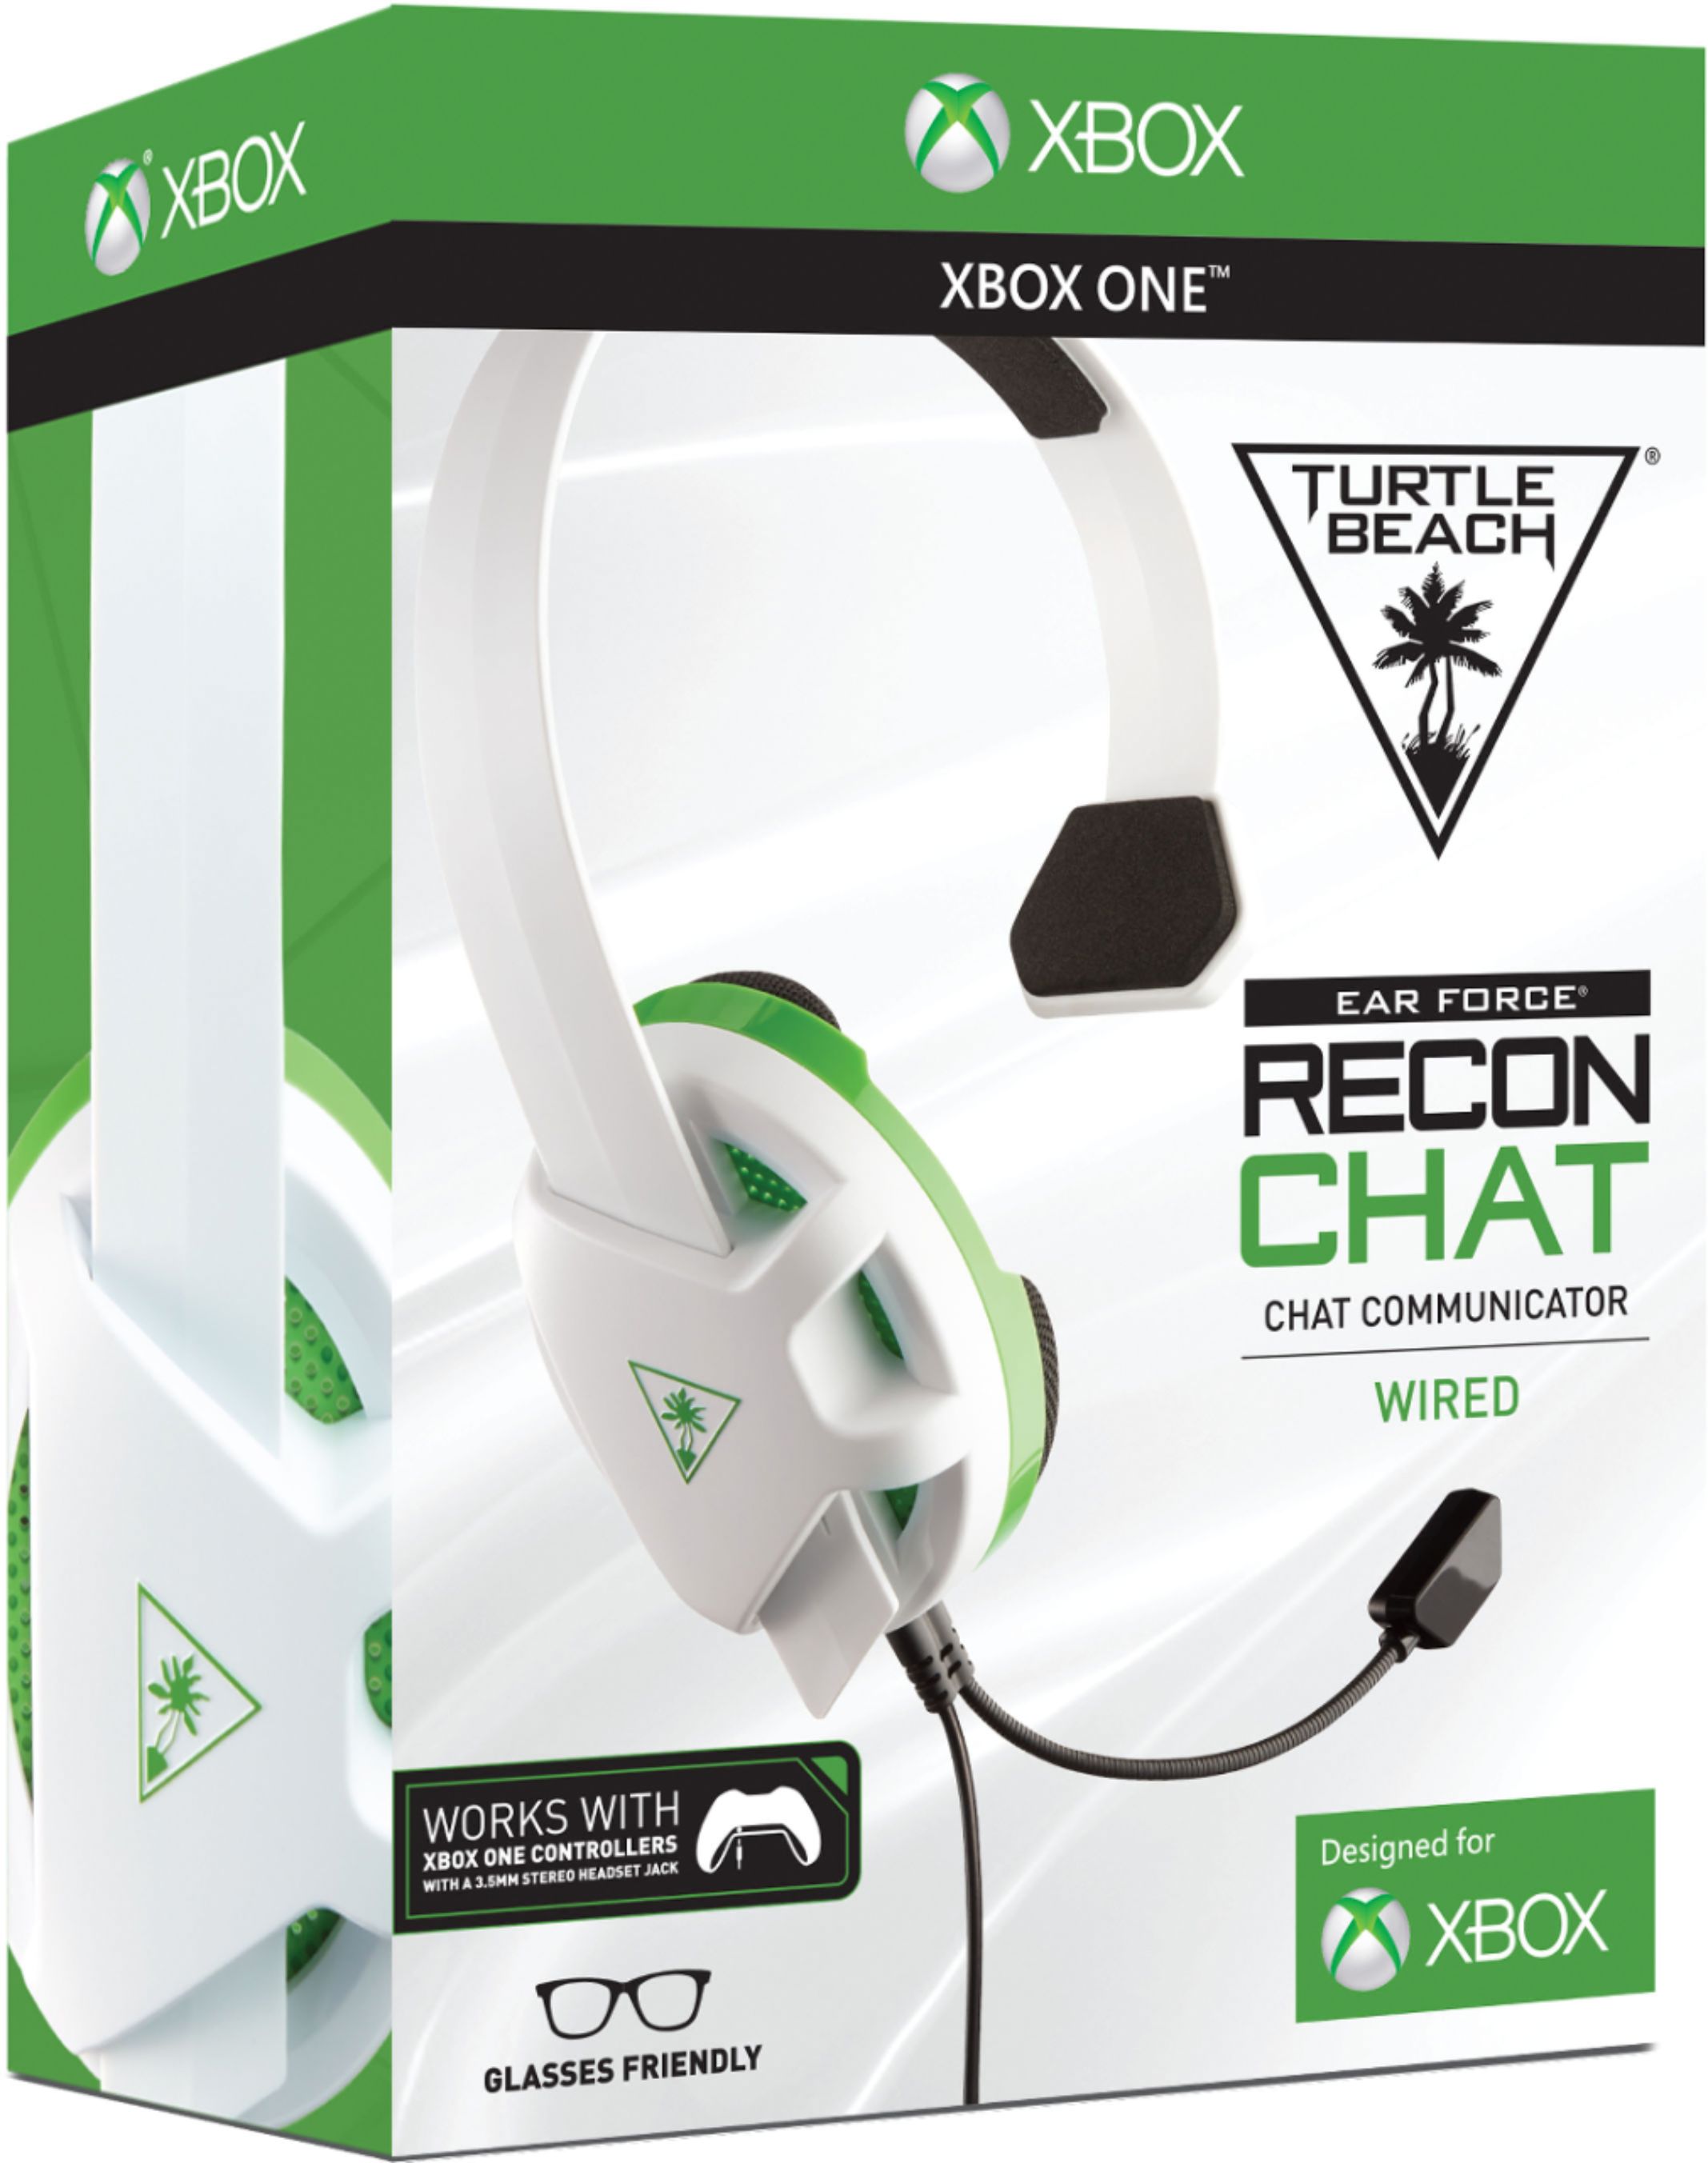 turtle beach xbox one recon chat